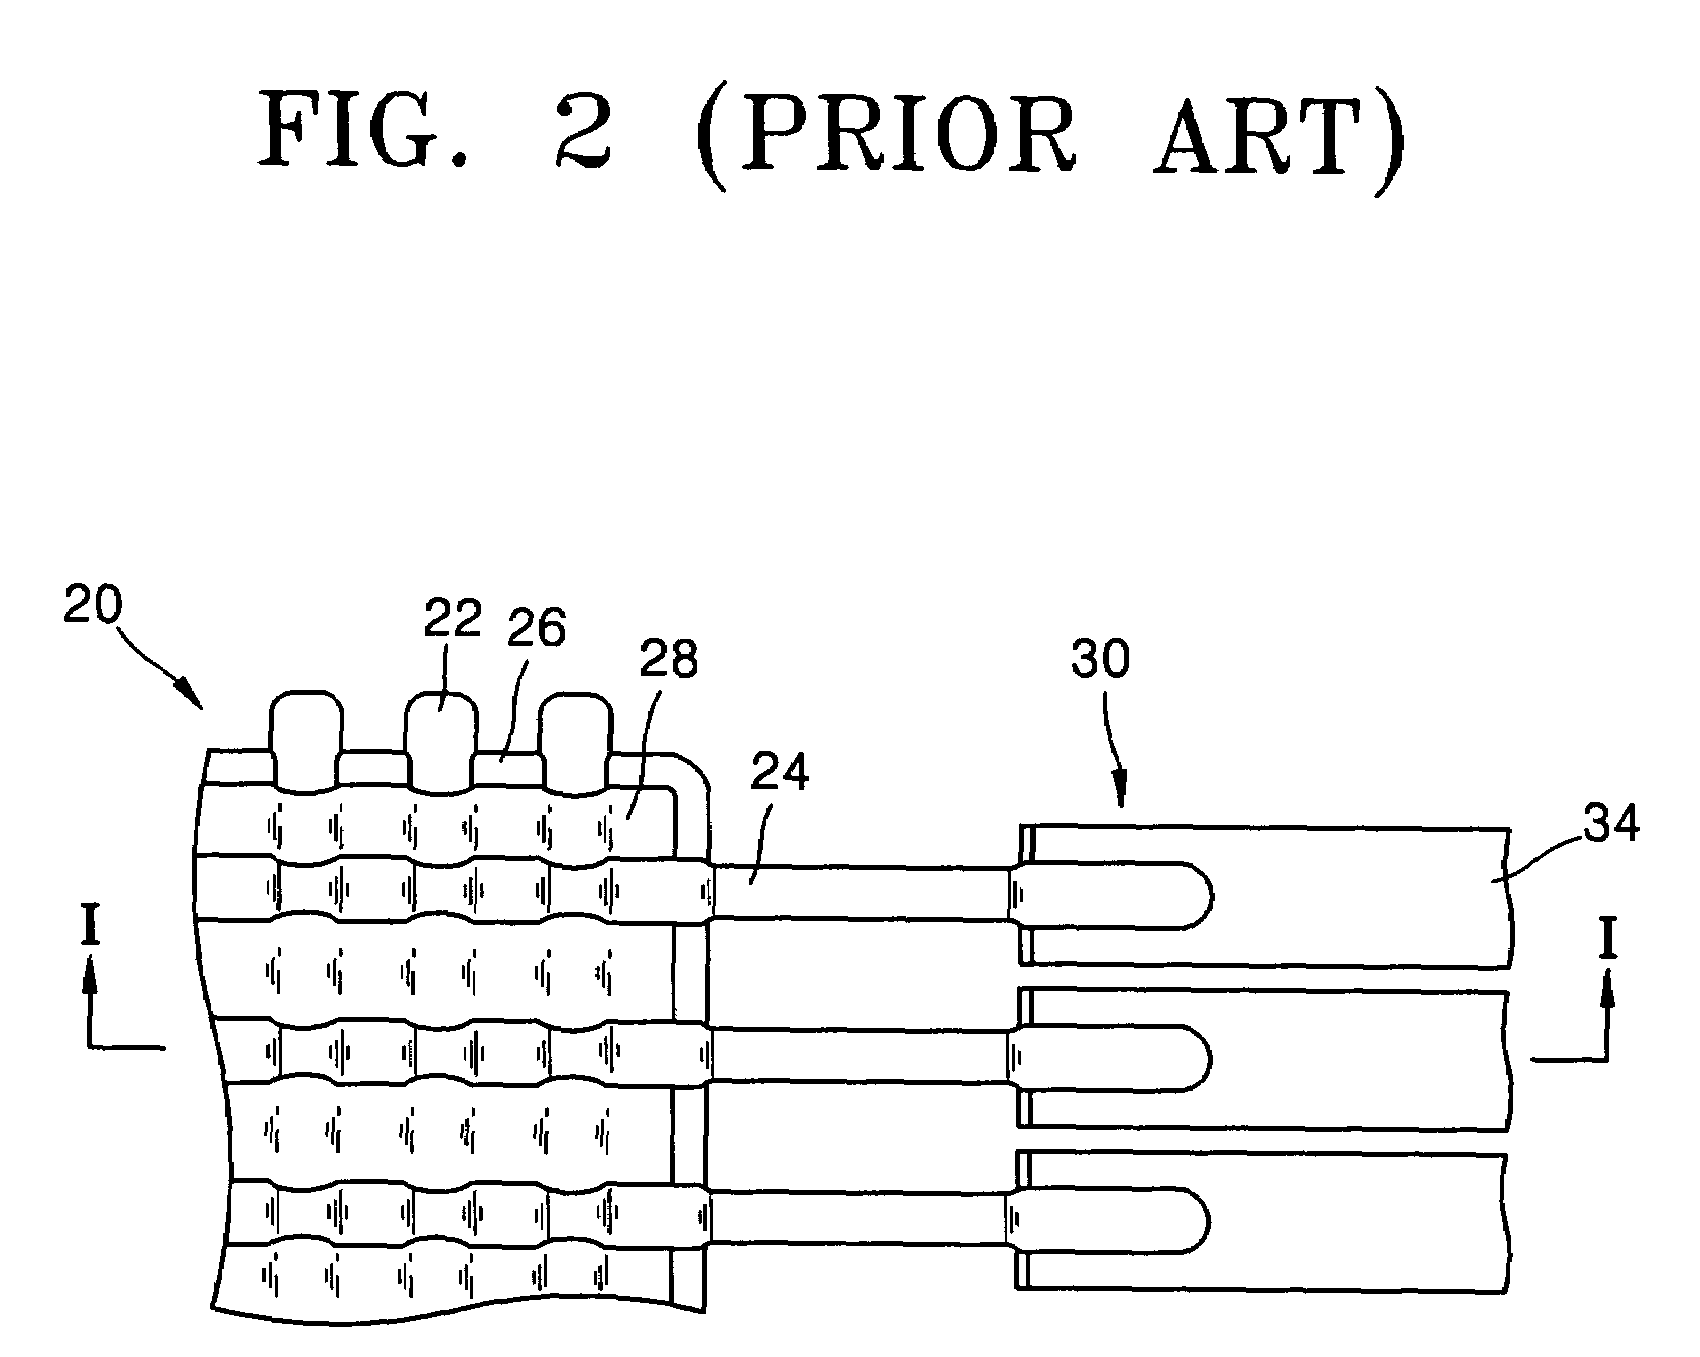 Electroluminescent device and method of manufacturing the same